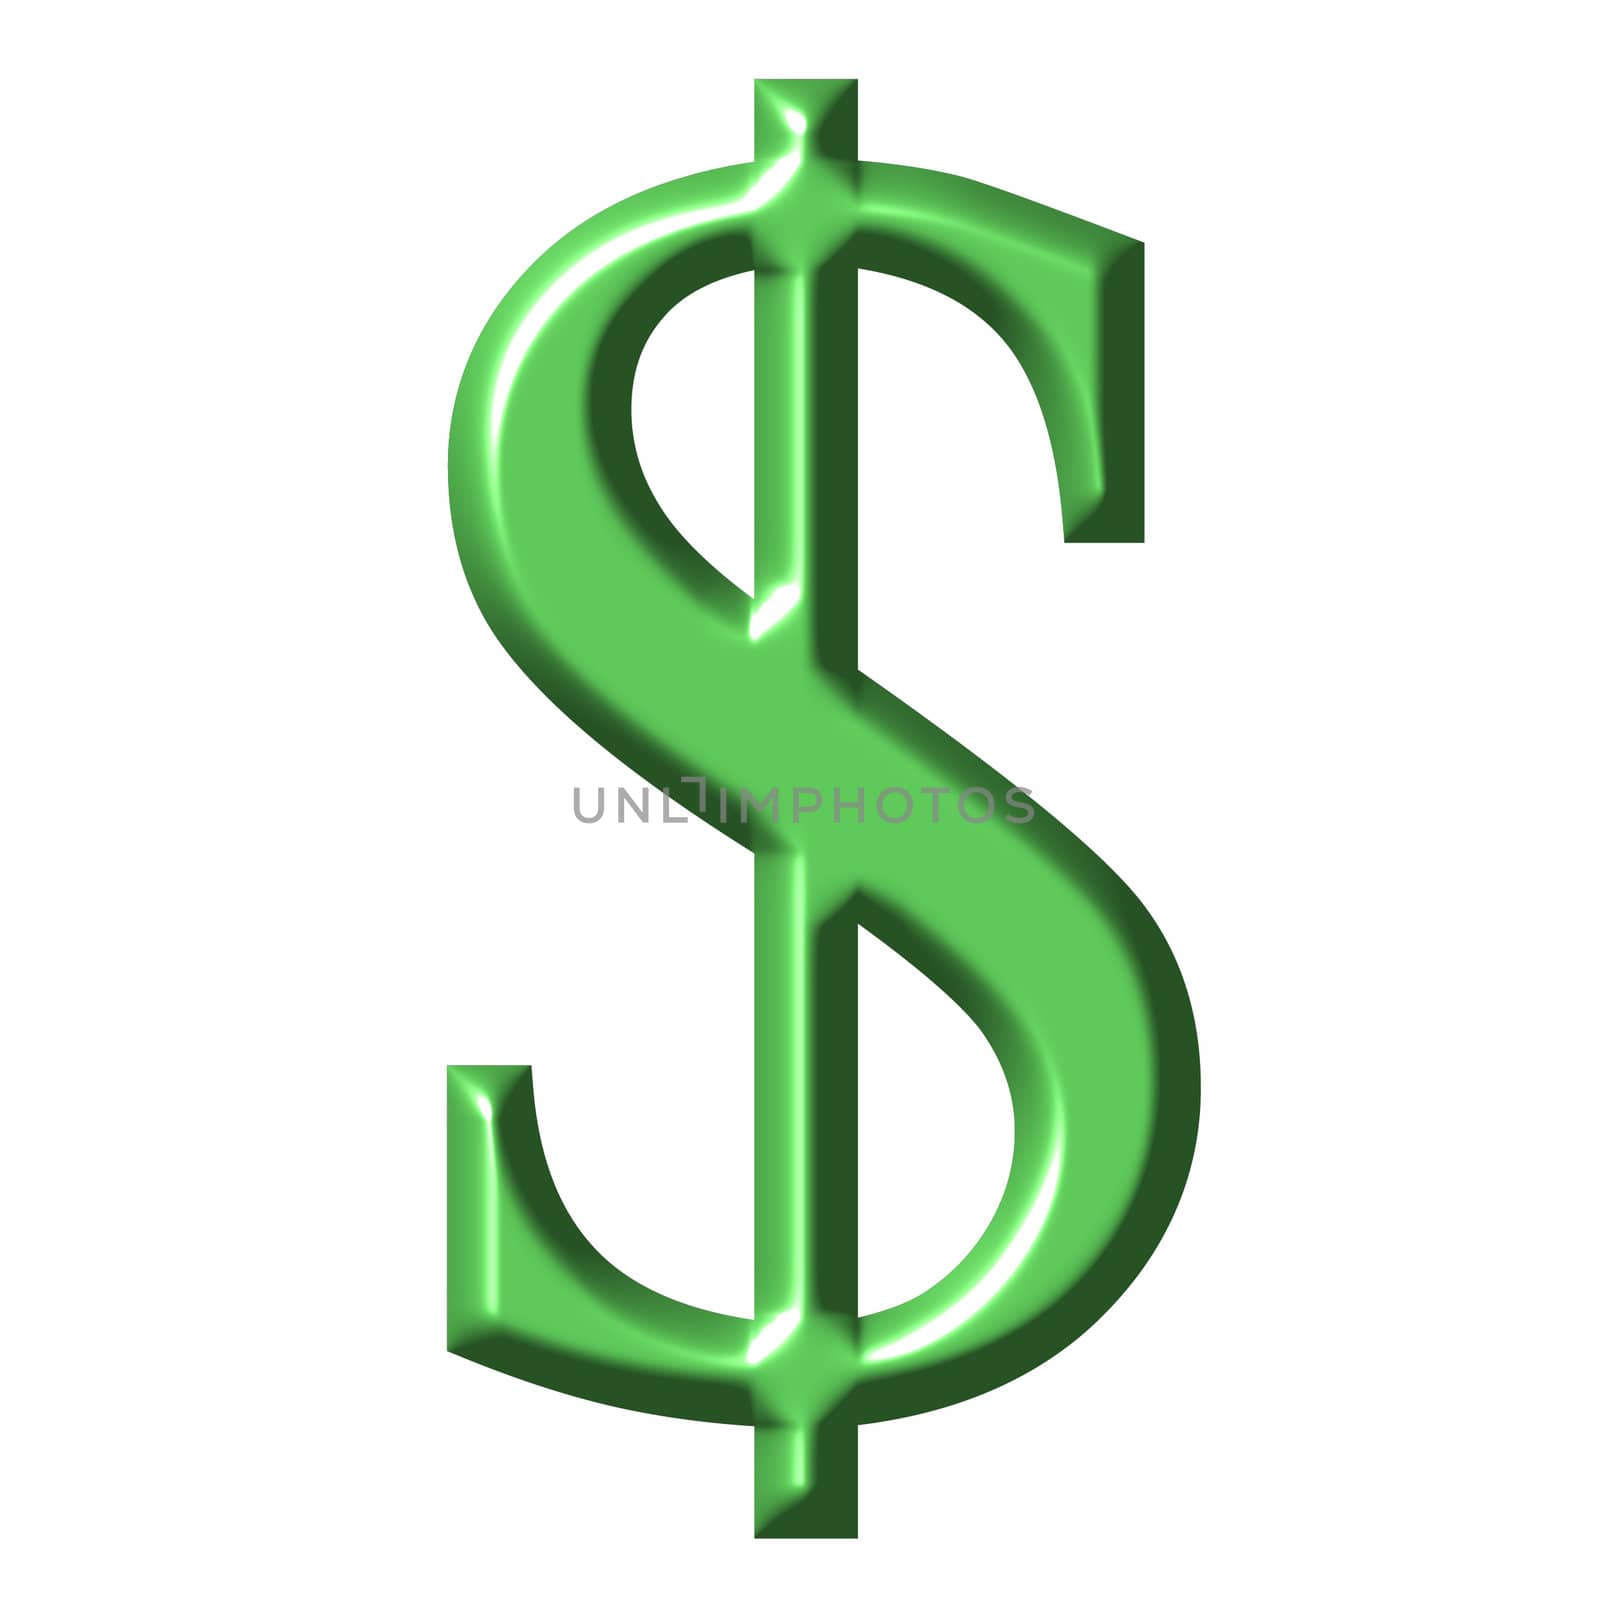 3d dollar symbol isolated in white